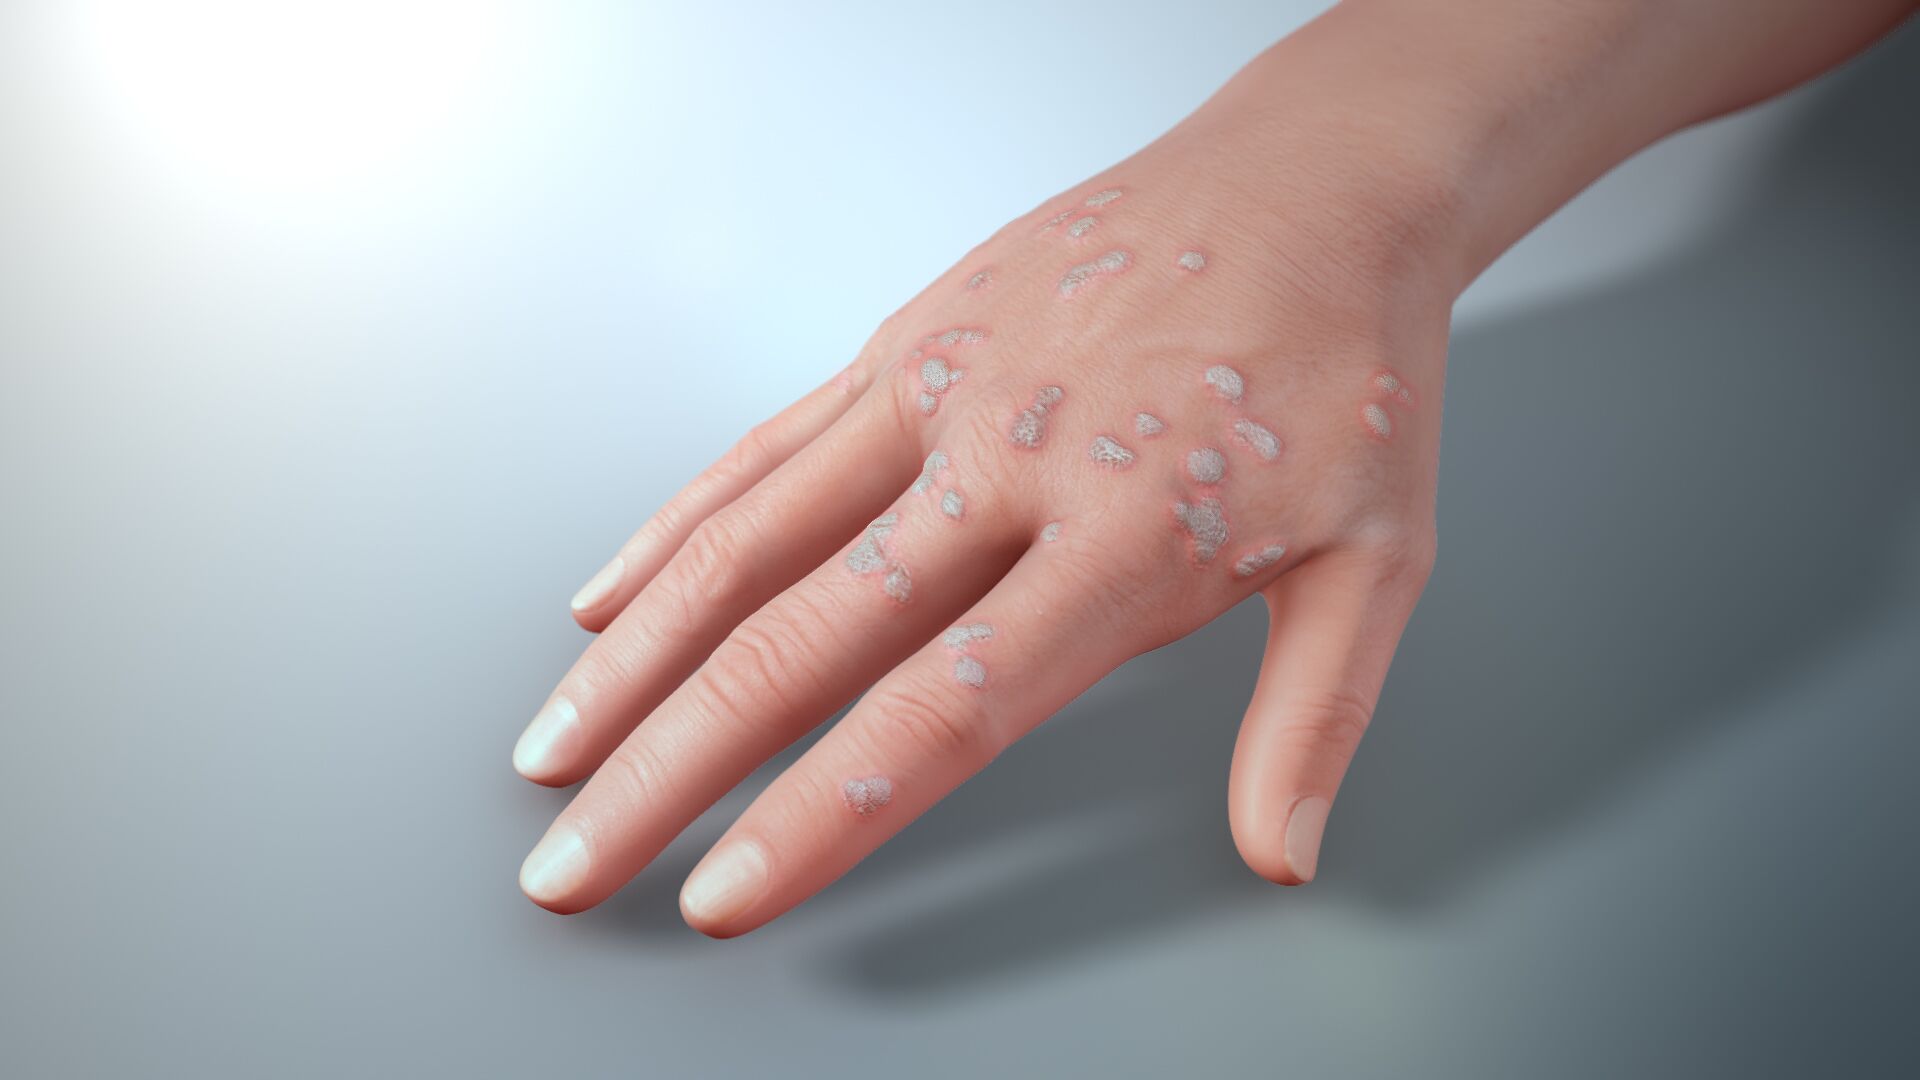 Hpv and warts on hands